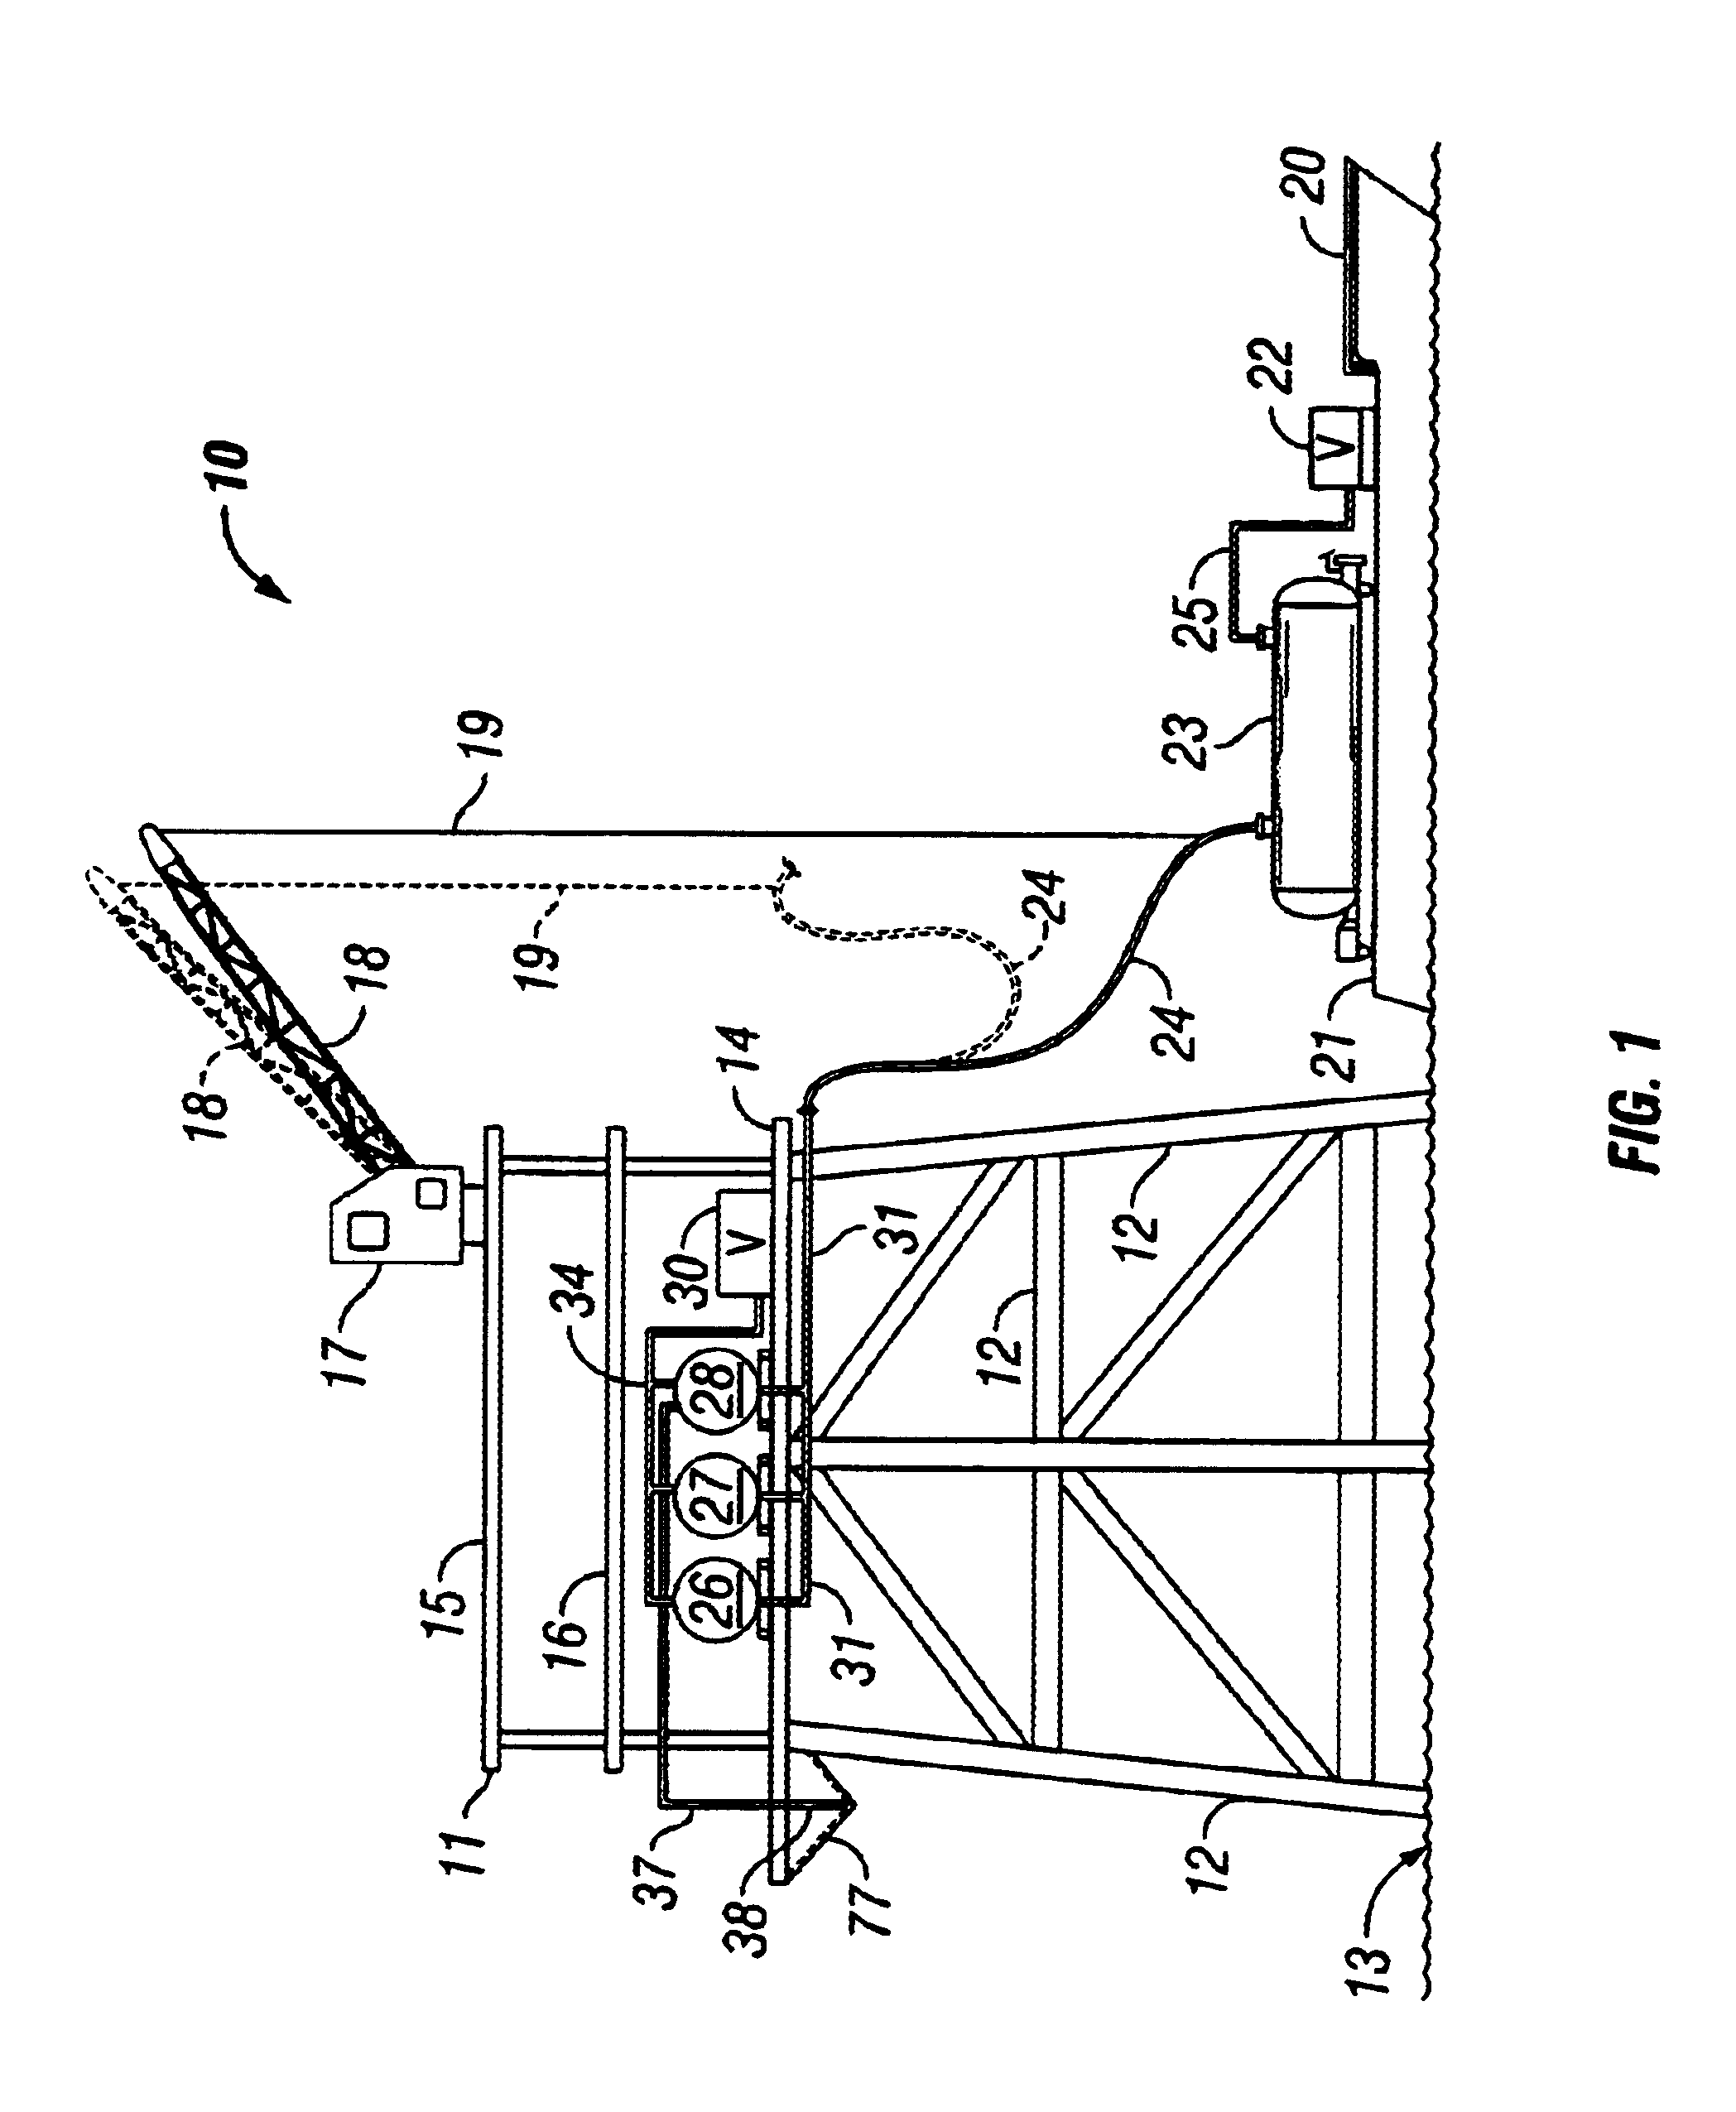 Methods and apparatus for disposing of deleterious materials from a well